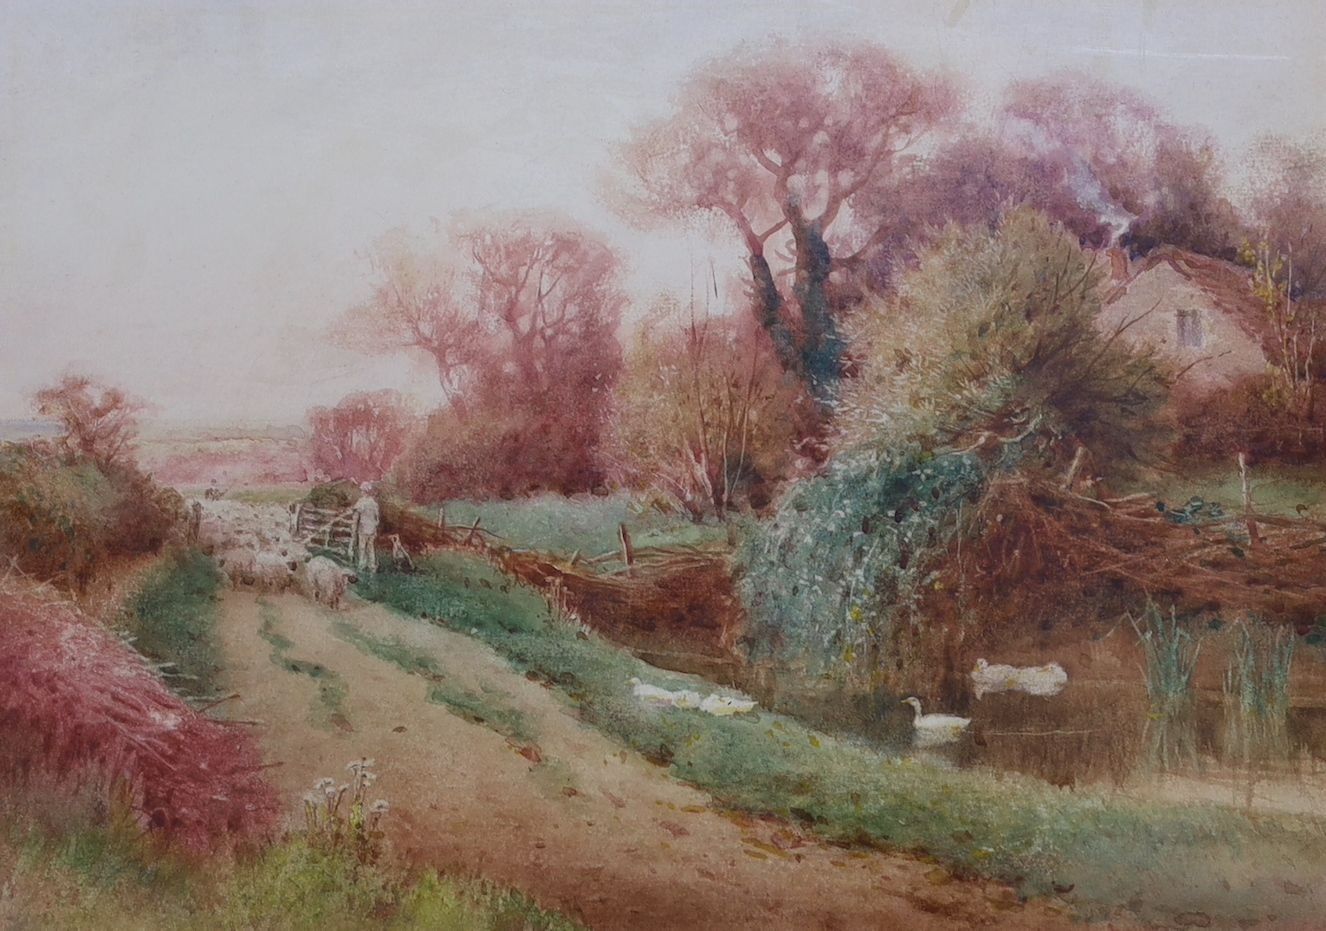 Henry John Sylvester Stannard (19870-1951), two watercolours, 'Changing Pastures' and 'Going to Market', initialled, 27 x 38cm and 24 x 34cm